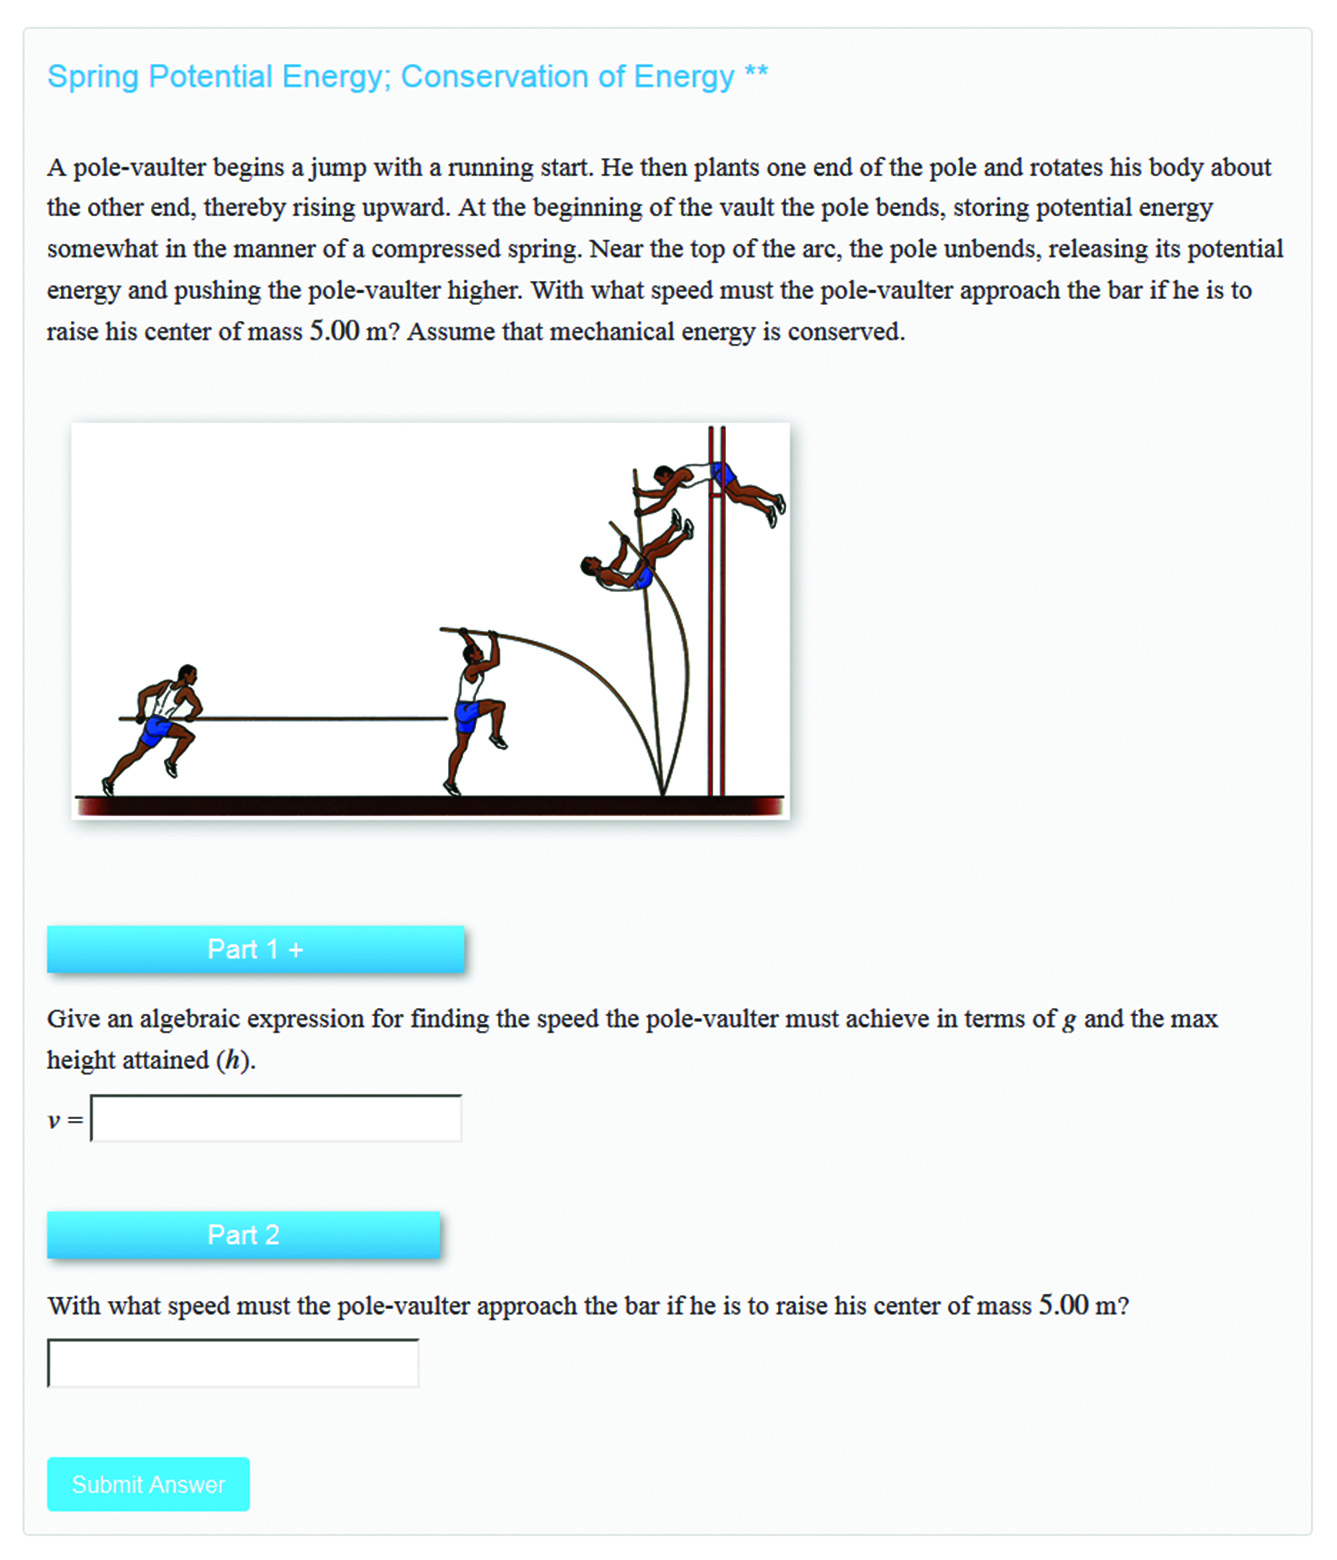 A question about a pole-vaulter beginning a jump with a running start, then rotating his body about the other end. Students must give an expression for the speed.